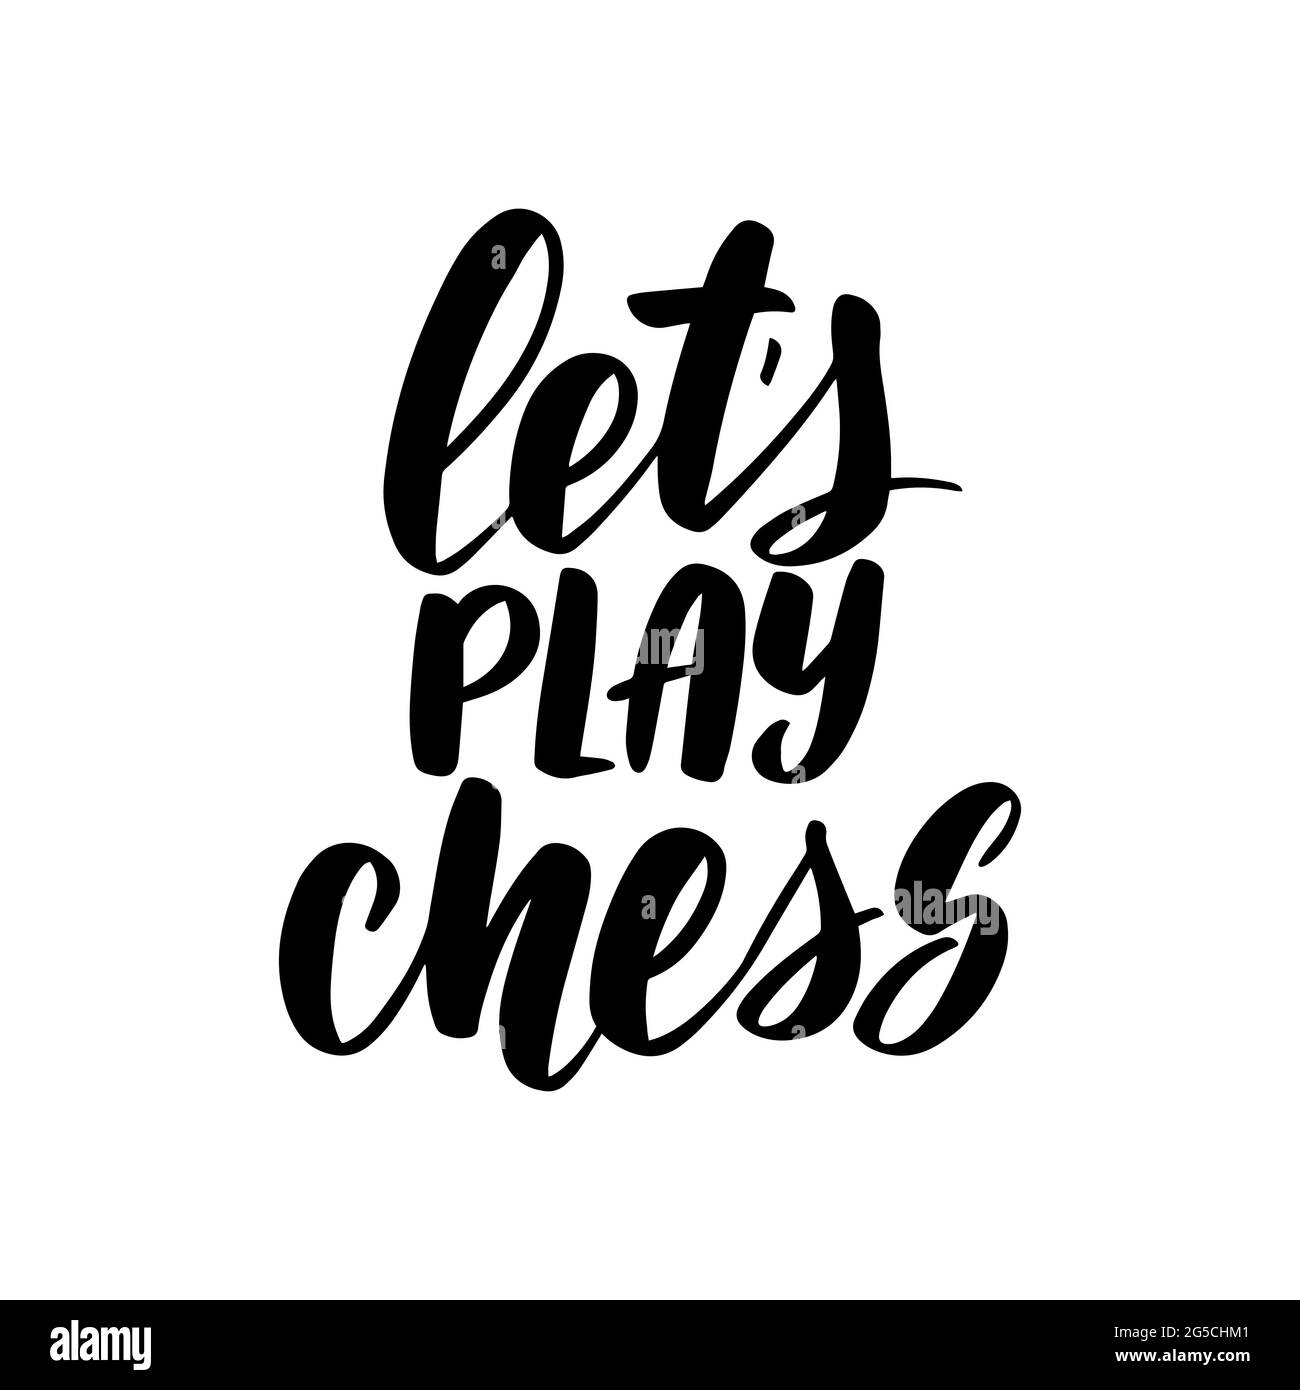 Let's play chess.